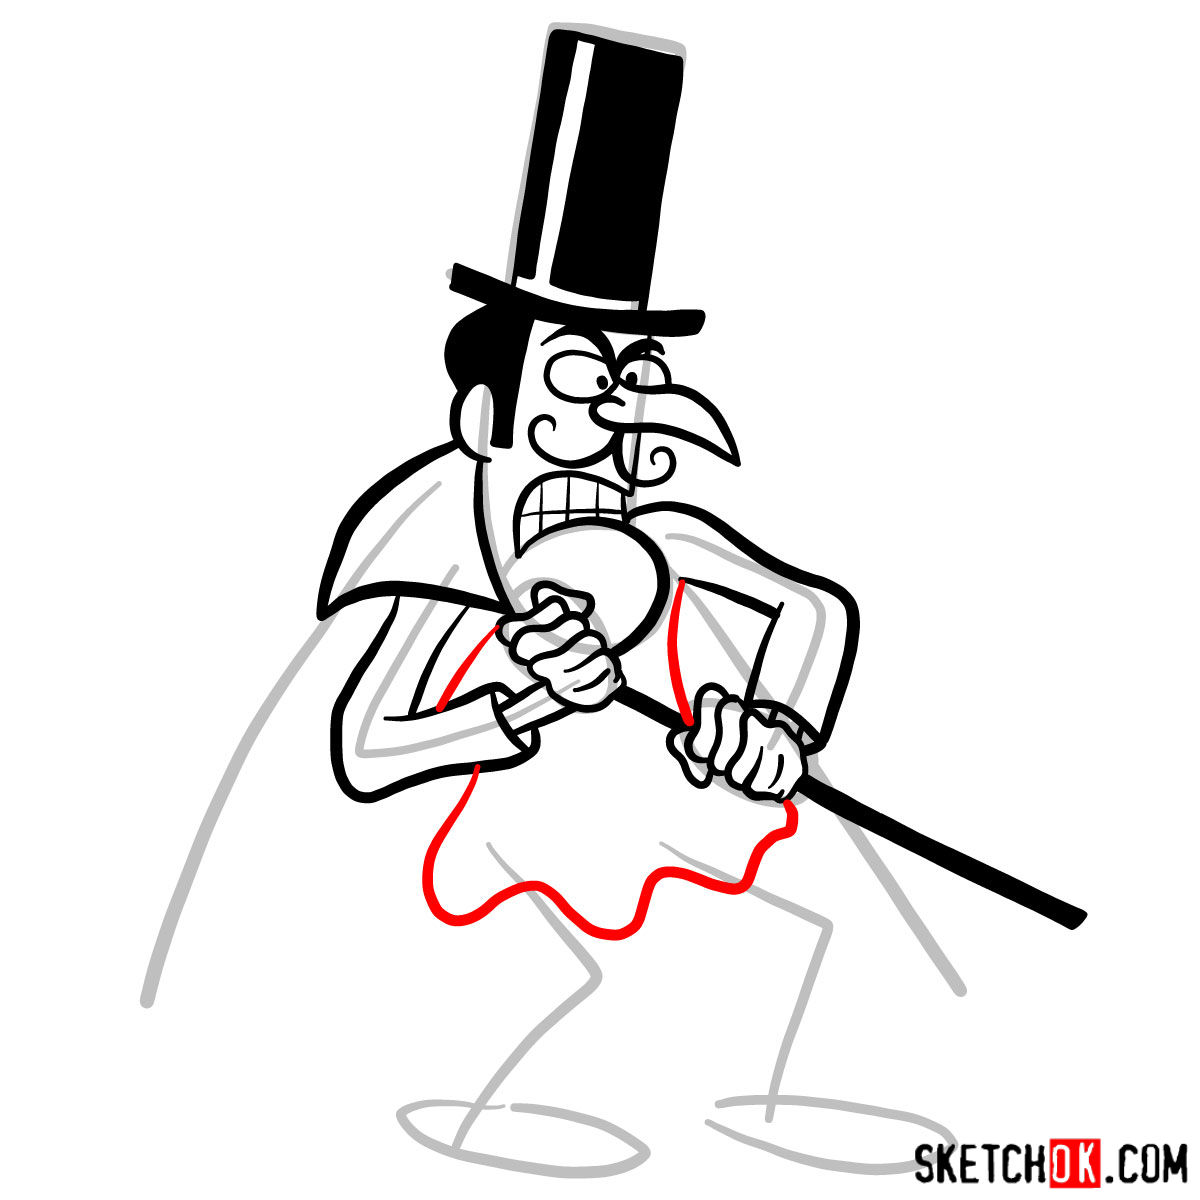 How to draw Snidely Whiplash - step 07